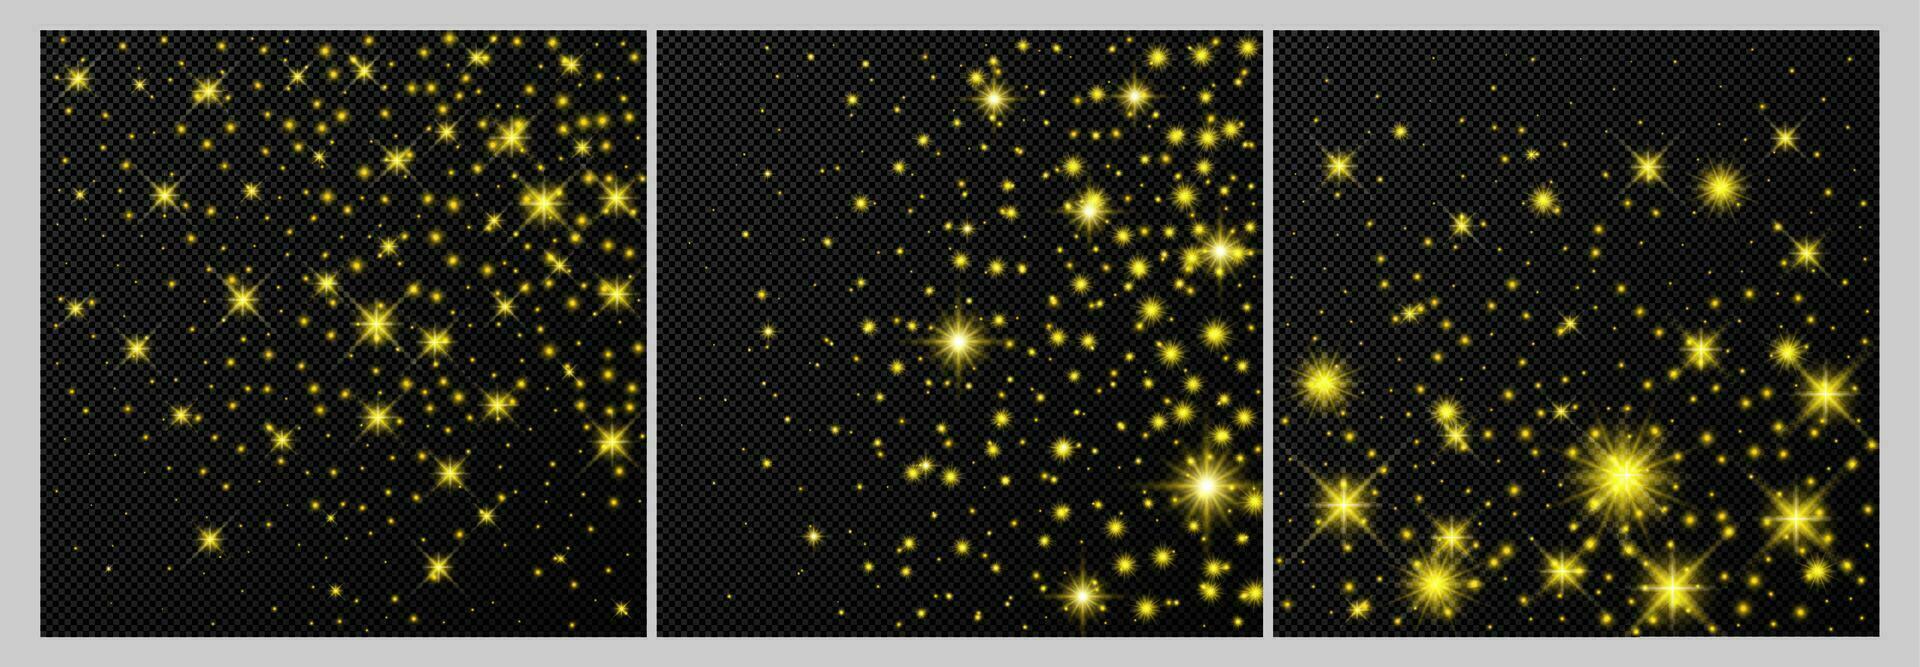 Set of three gold backdrops with stars and dust sparkles isolated on dark background. Celebratory magical Christmas shining light effect. Vector illustration.